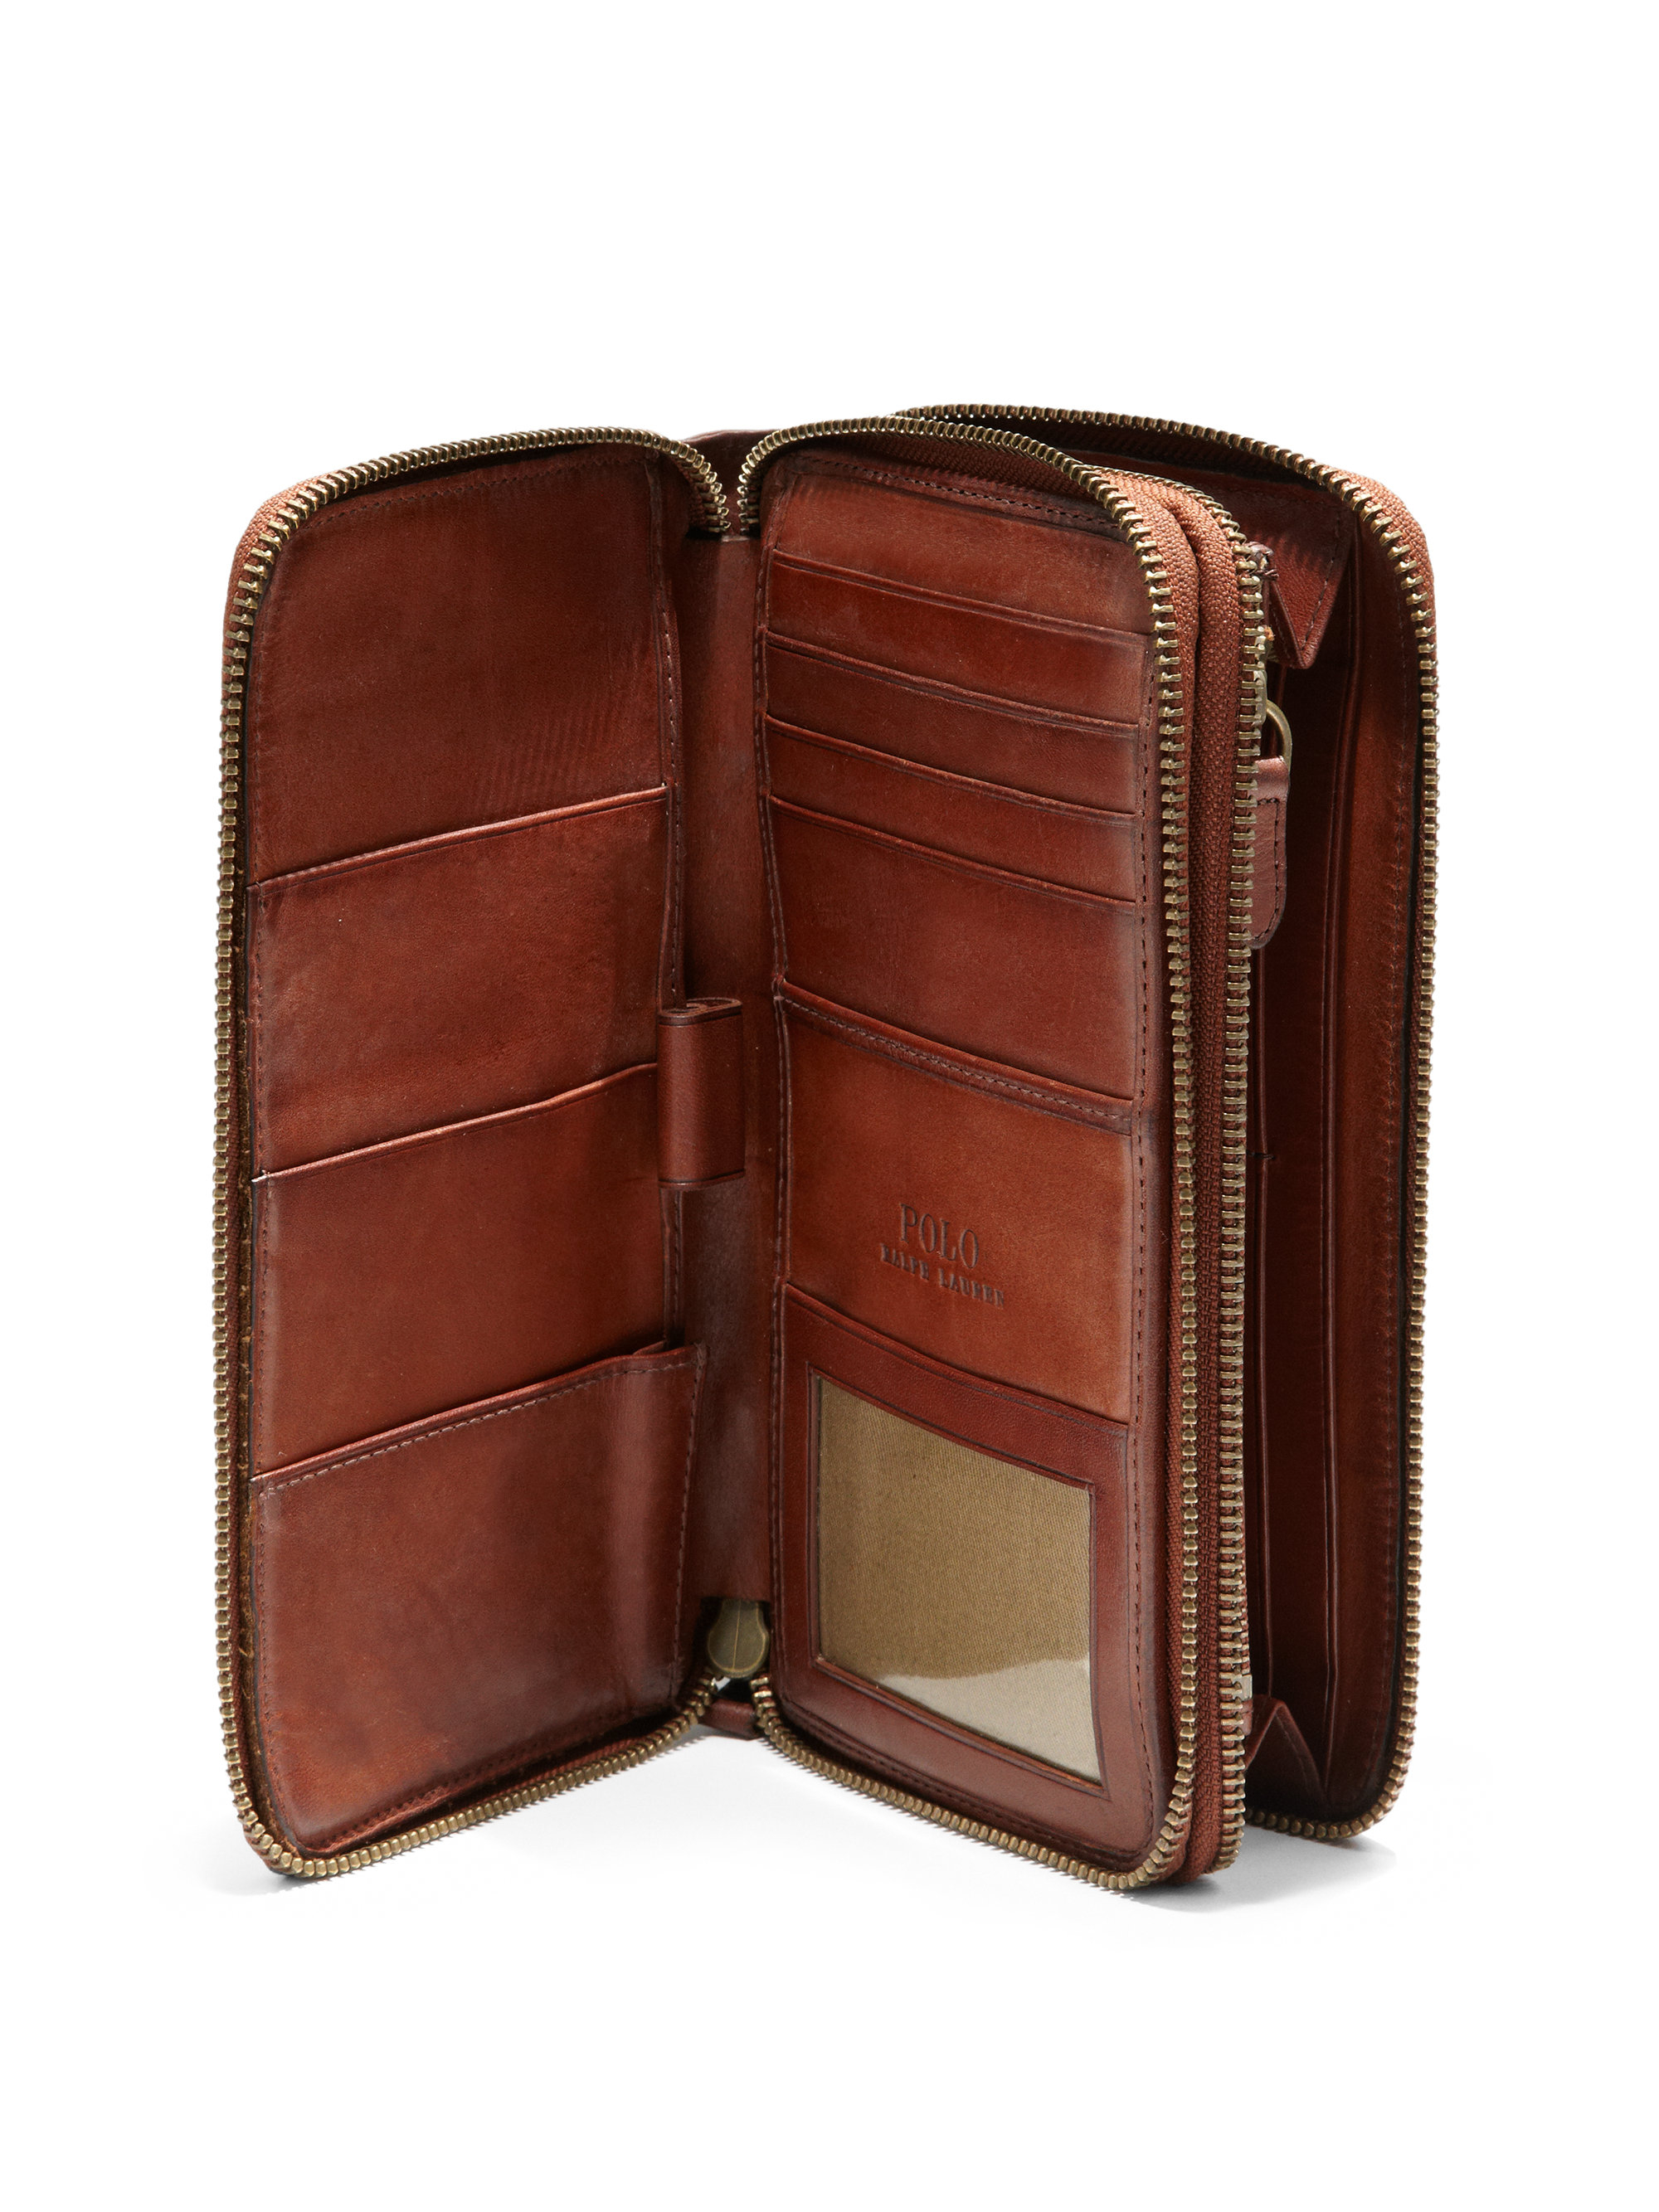 Lyst - Polo Ralph Lauren Heritage Leather Travel Wallet in Brown for Men